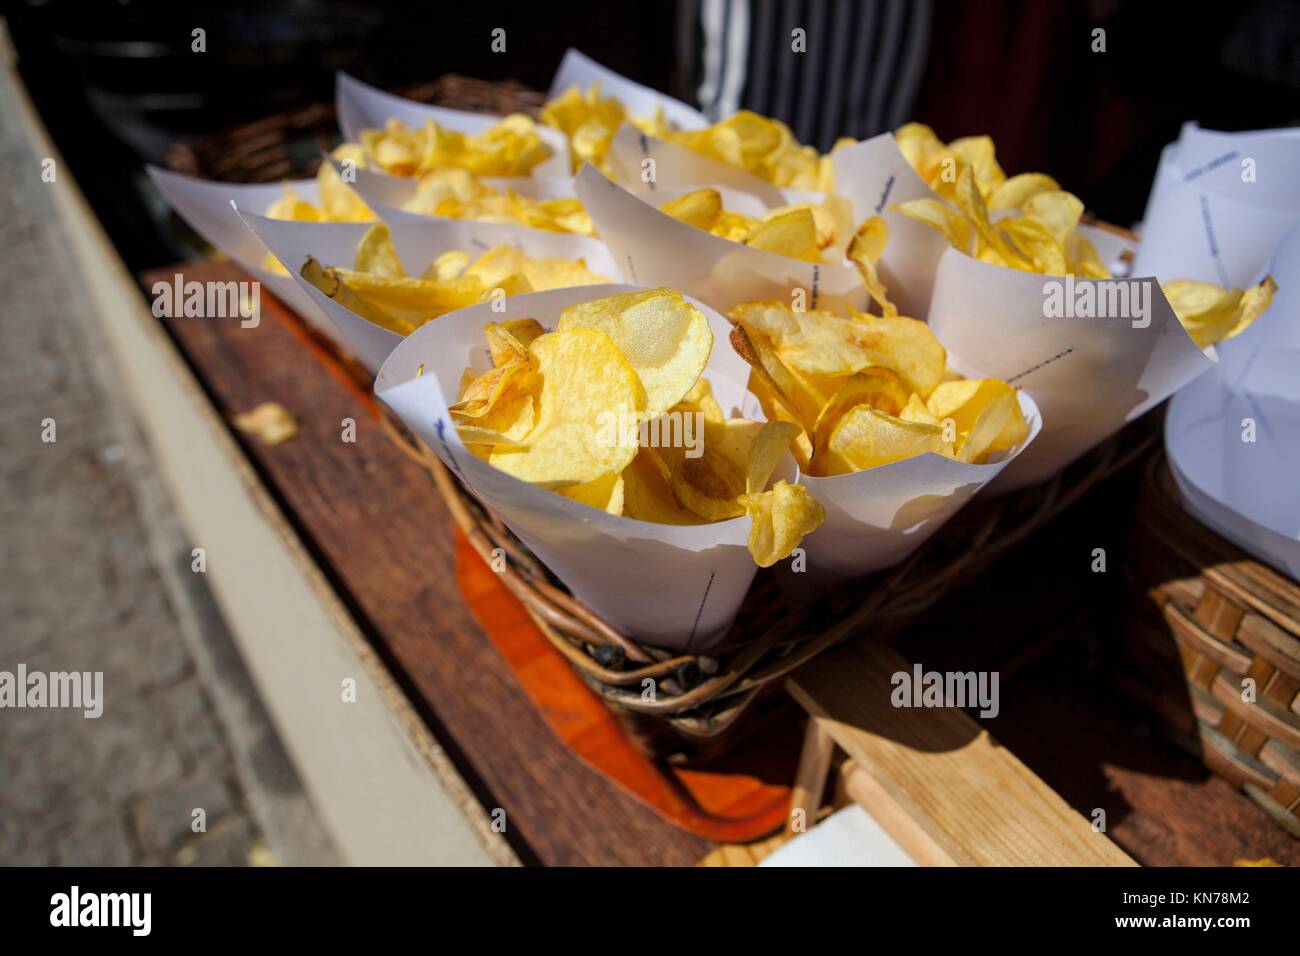 Fried potato chips in paper cornets for sell at market stall on wicker basket. Stock Photo